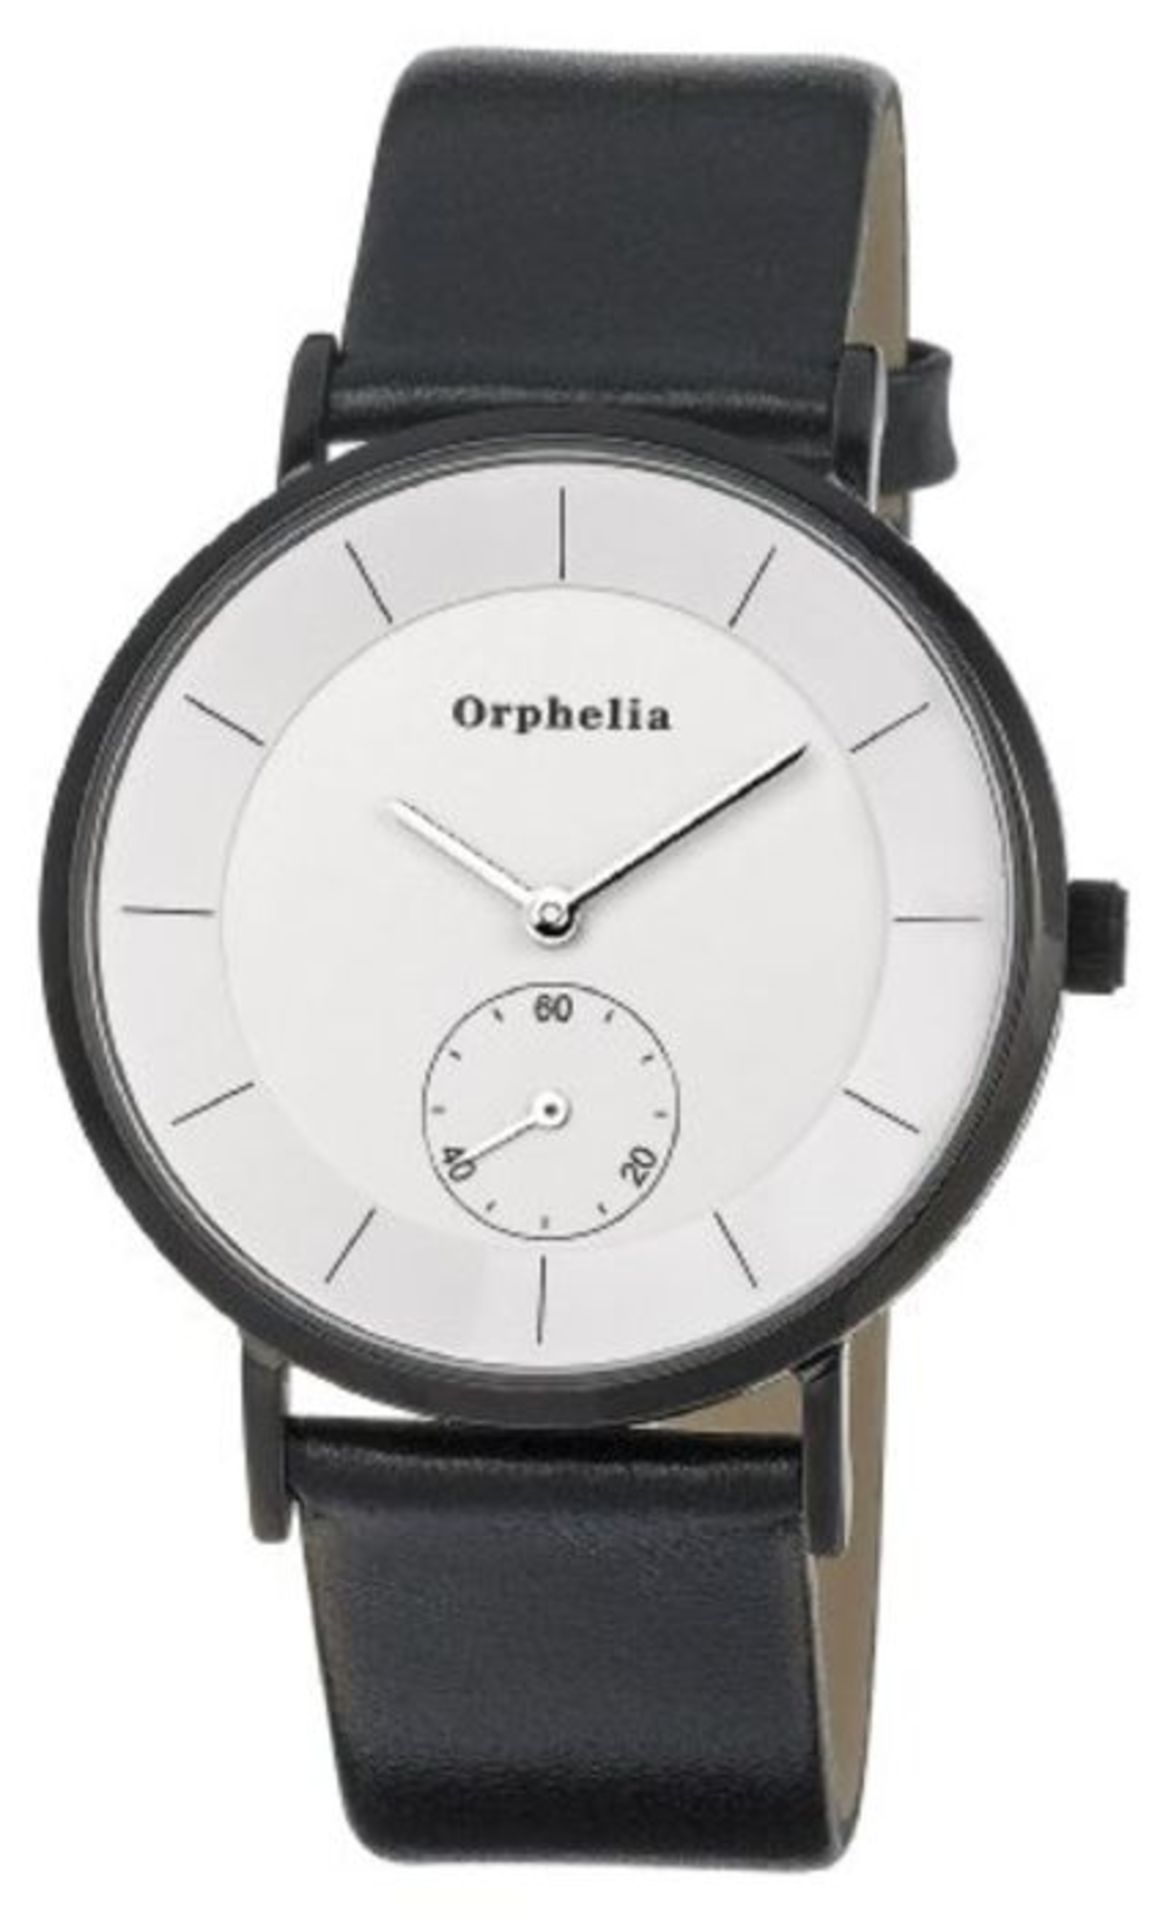 Orphelia Women's Quartz Watch with White Dial and Black Leather Strap